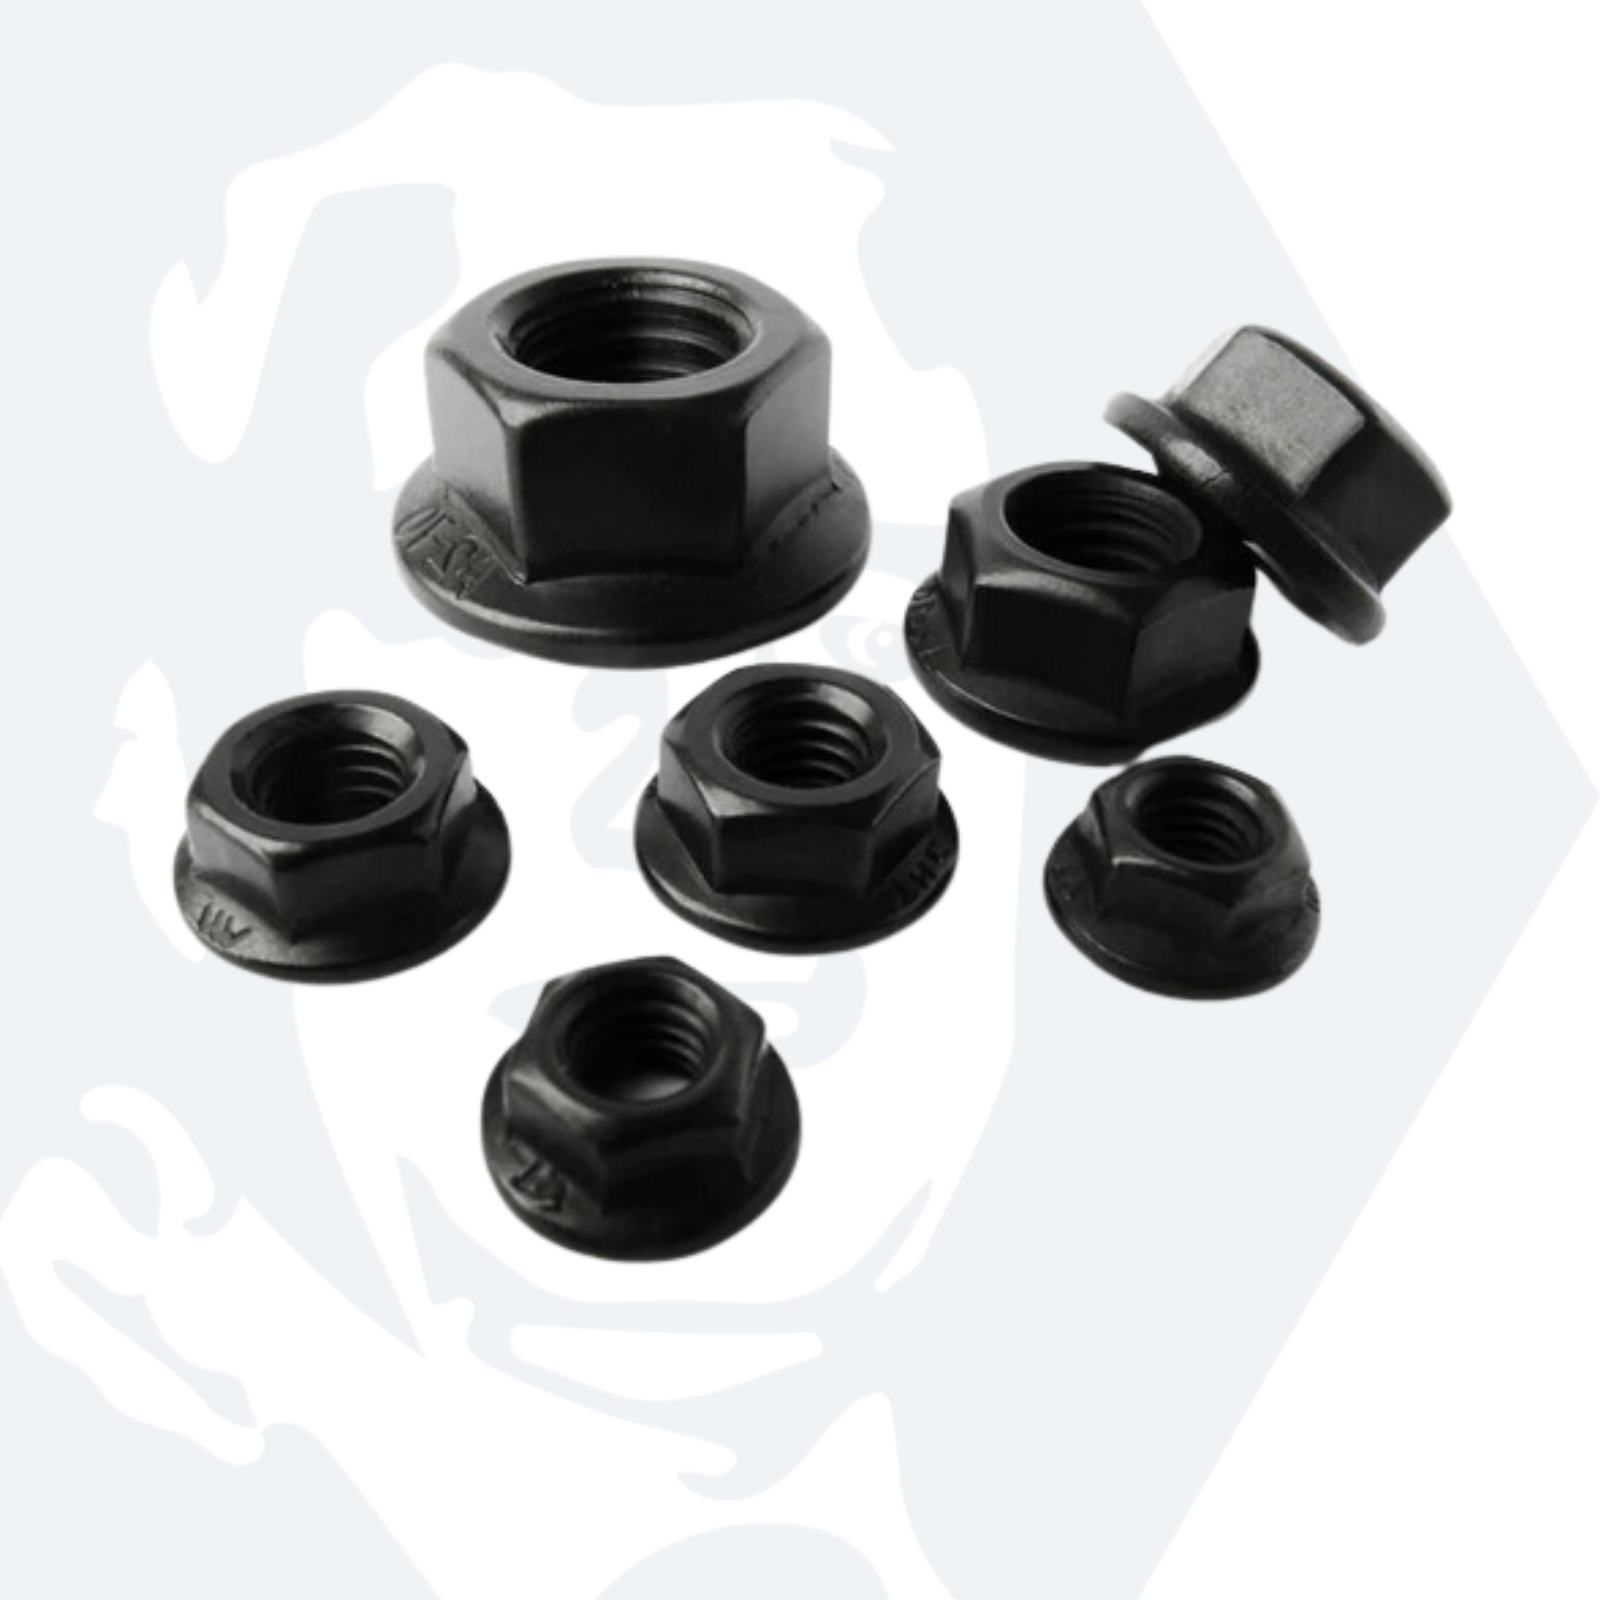 M4 Hexagon Flange Nut (DIN 6923) - Black Stainless Steel (A2)